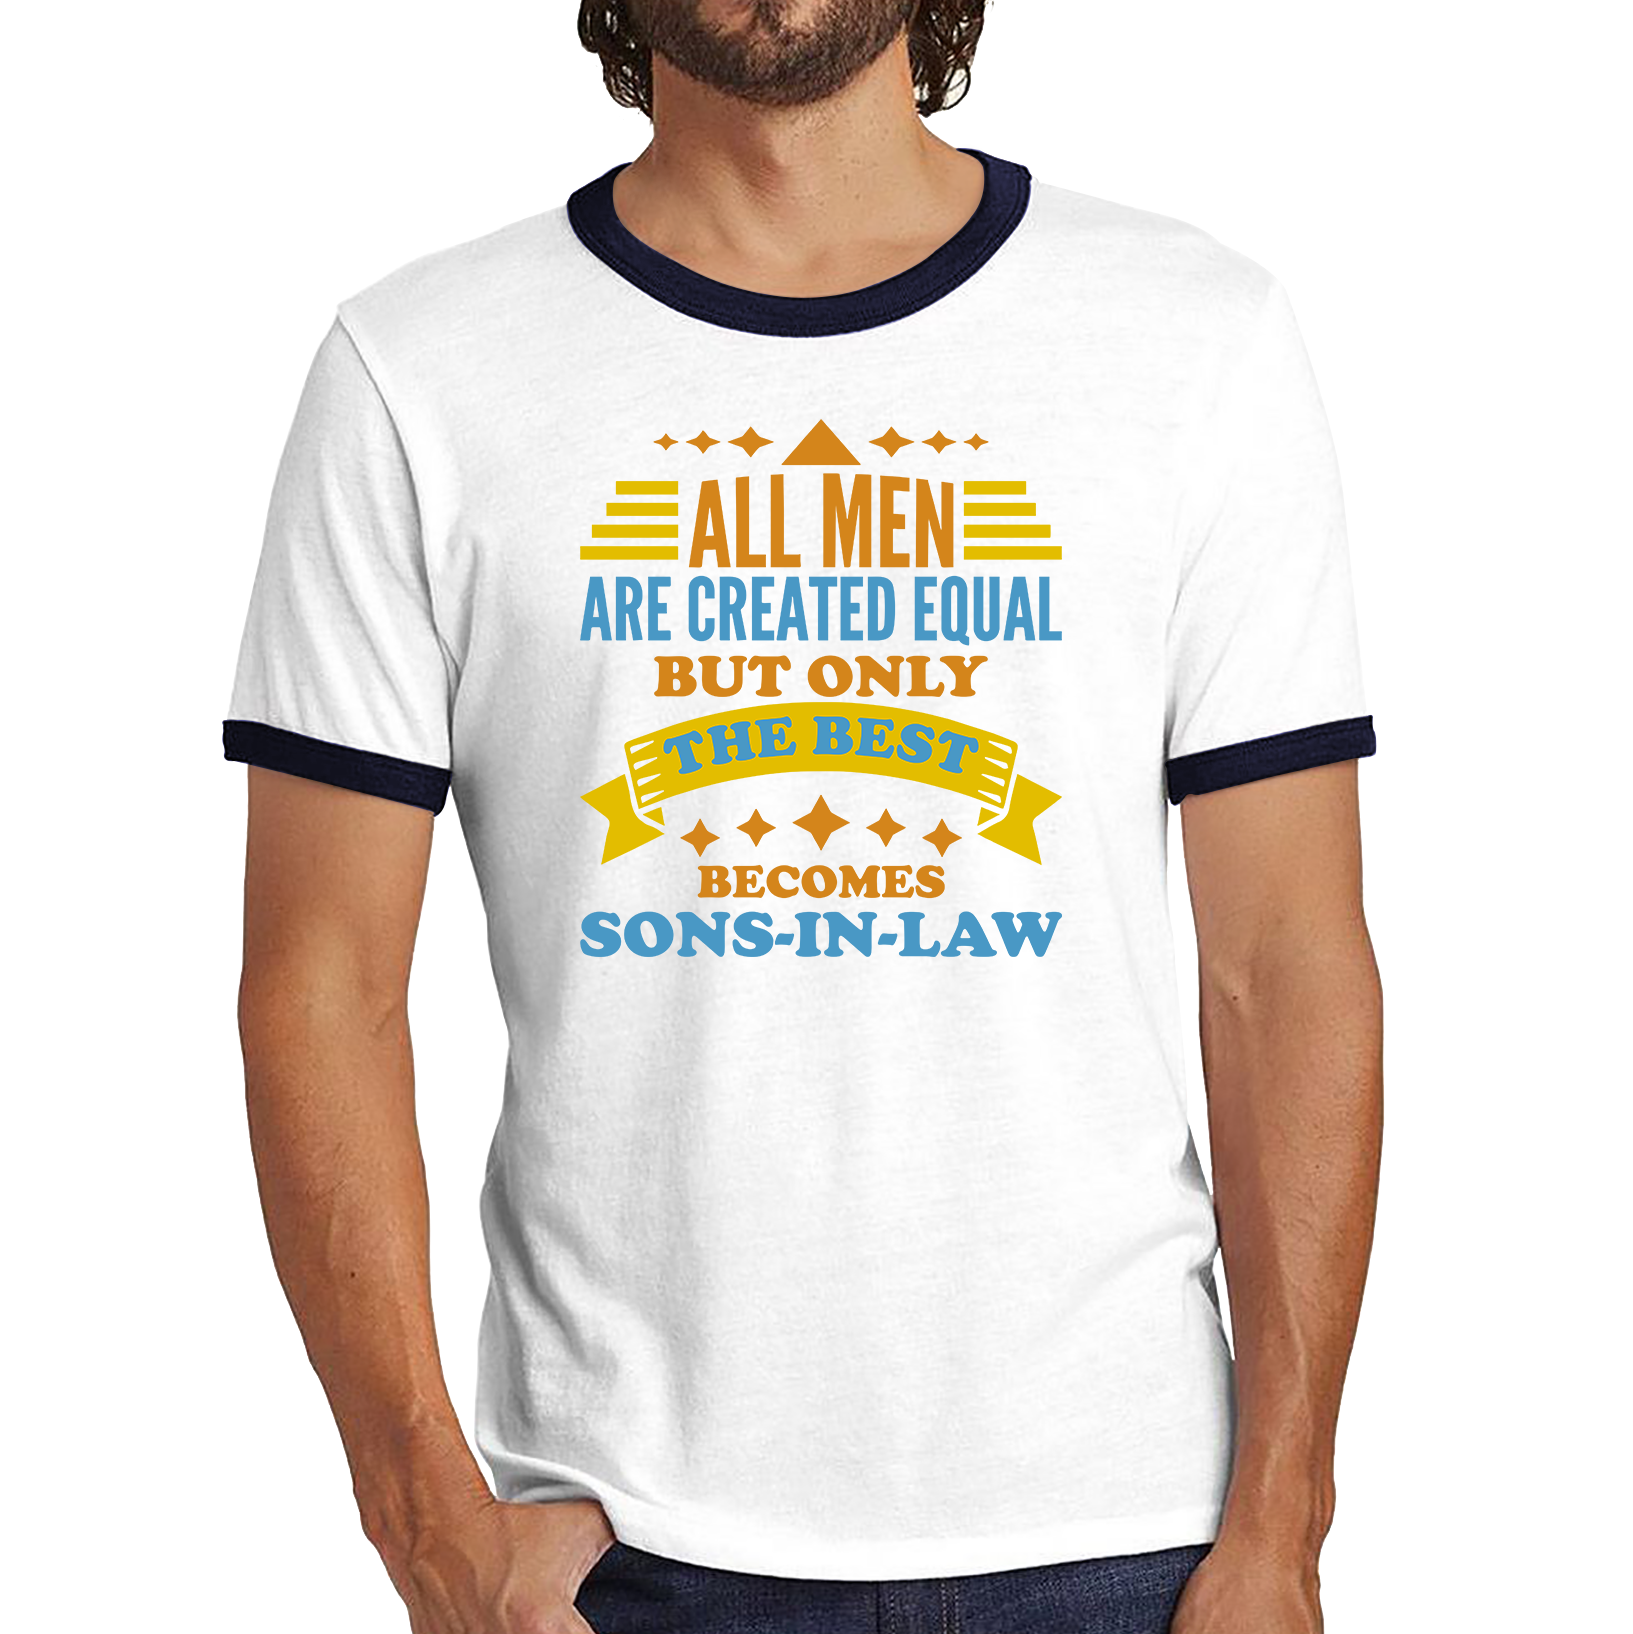 All Men Are Created Equal But Only The Best Becomes Sons-In-Law Ringer T Shirt